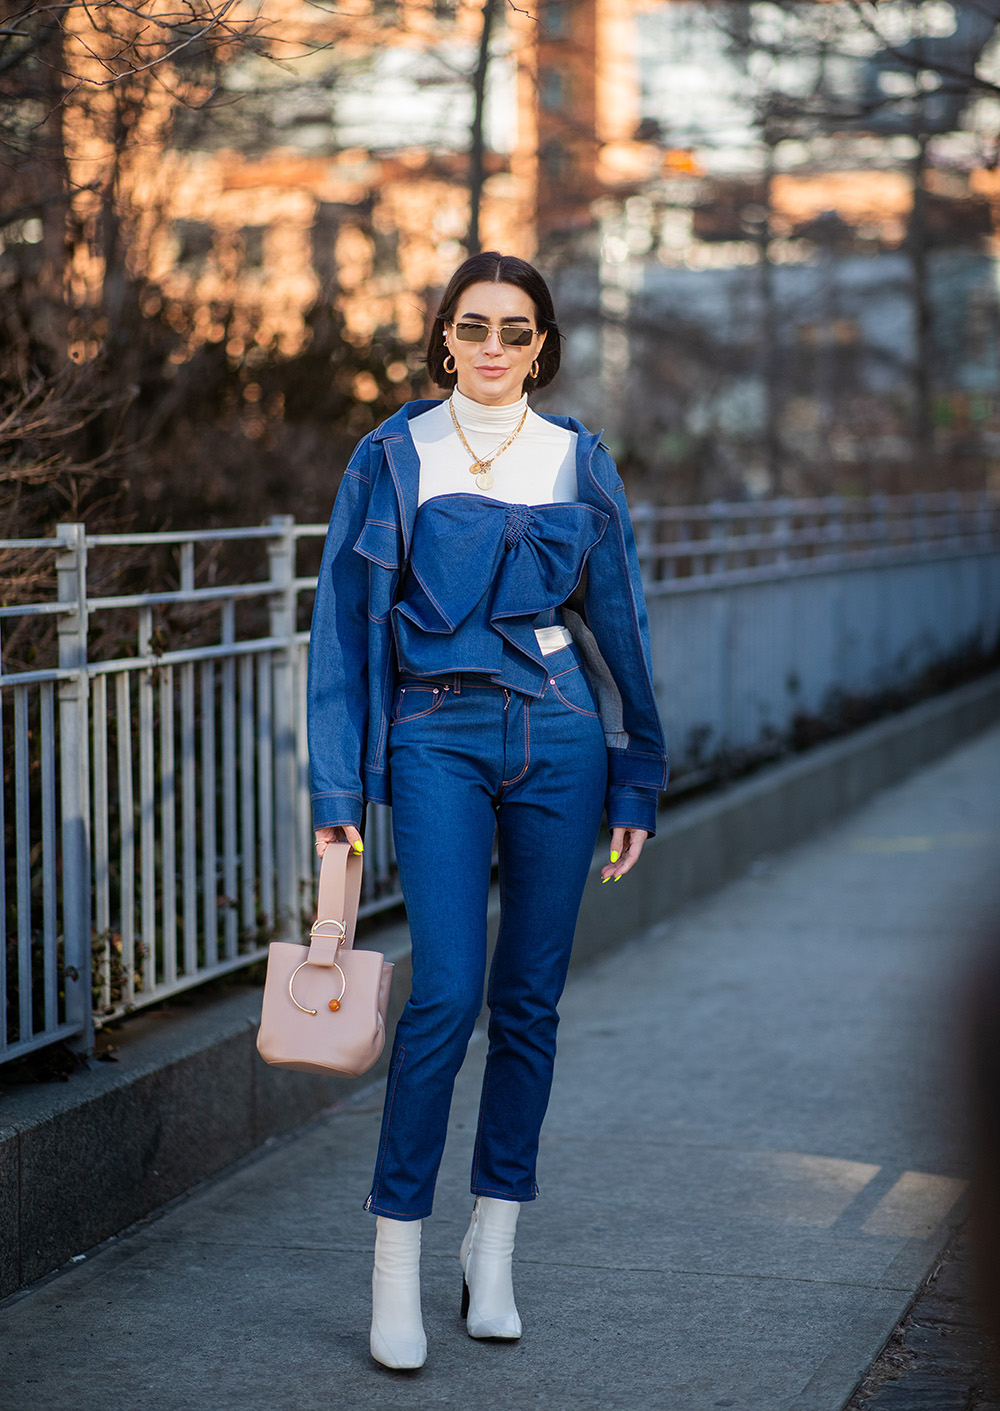 NEW YORK, NEW YORK - FEBRUARY 09: Brittany Xavier is seen wearing denim jeans, top outside Adeam during New York Fashion Week Autumn Winter 2019 on February 09, 2019 in New York City. (Photo by Christian Vierig/Getty Images)